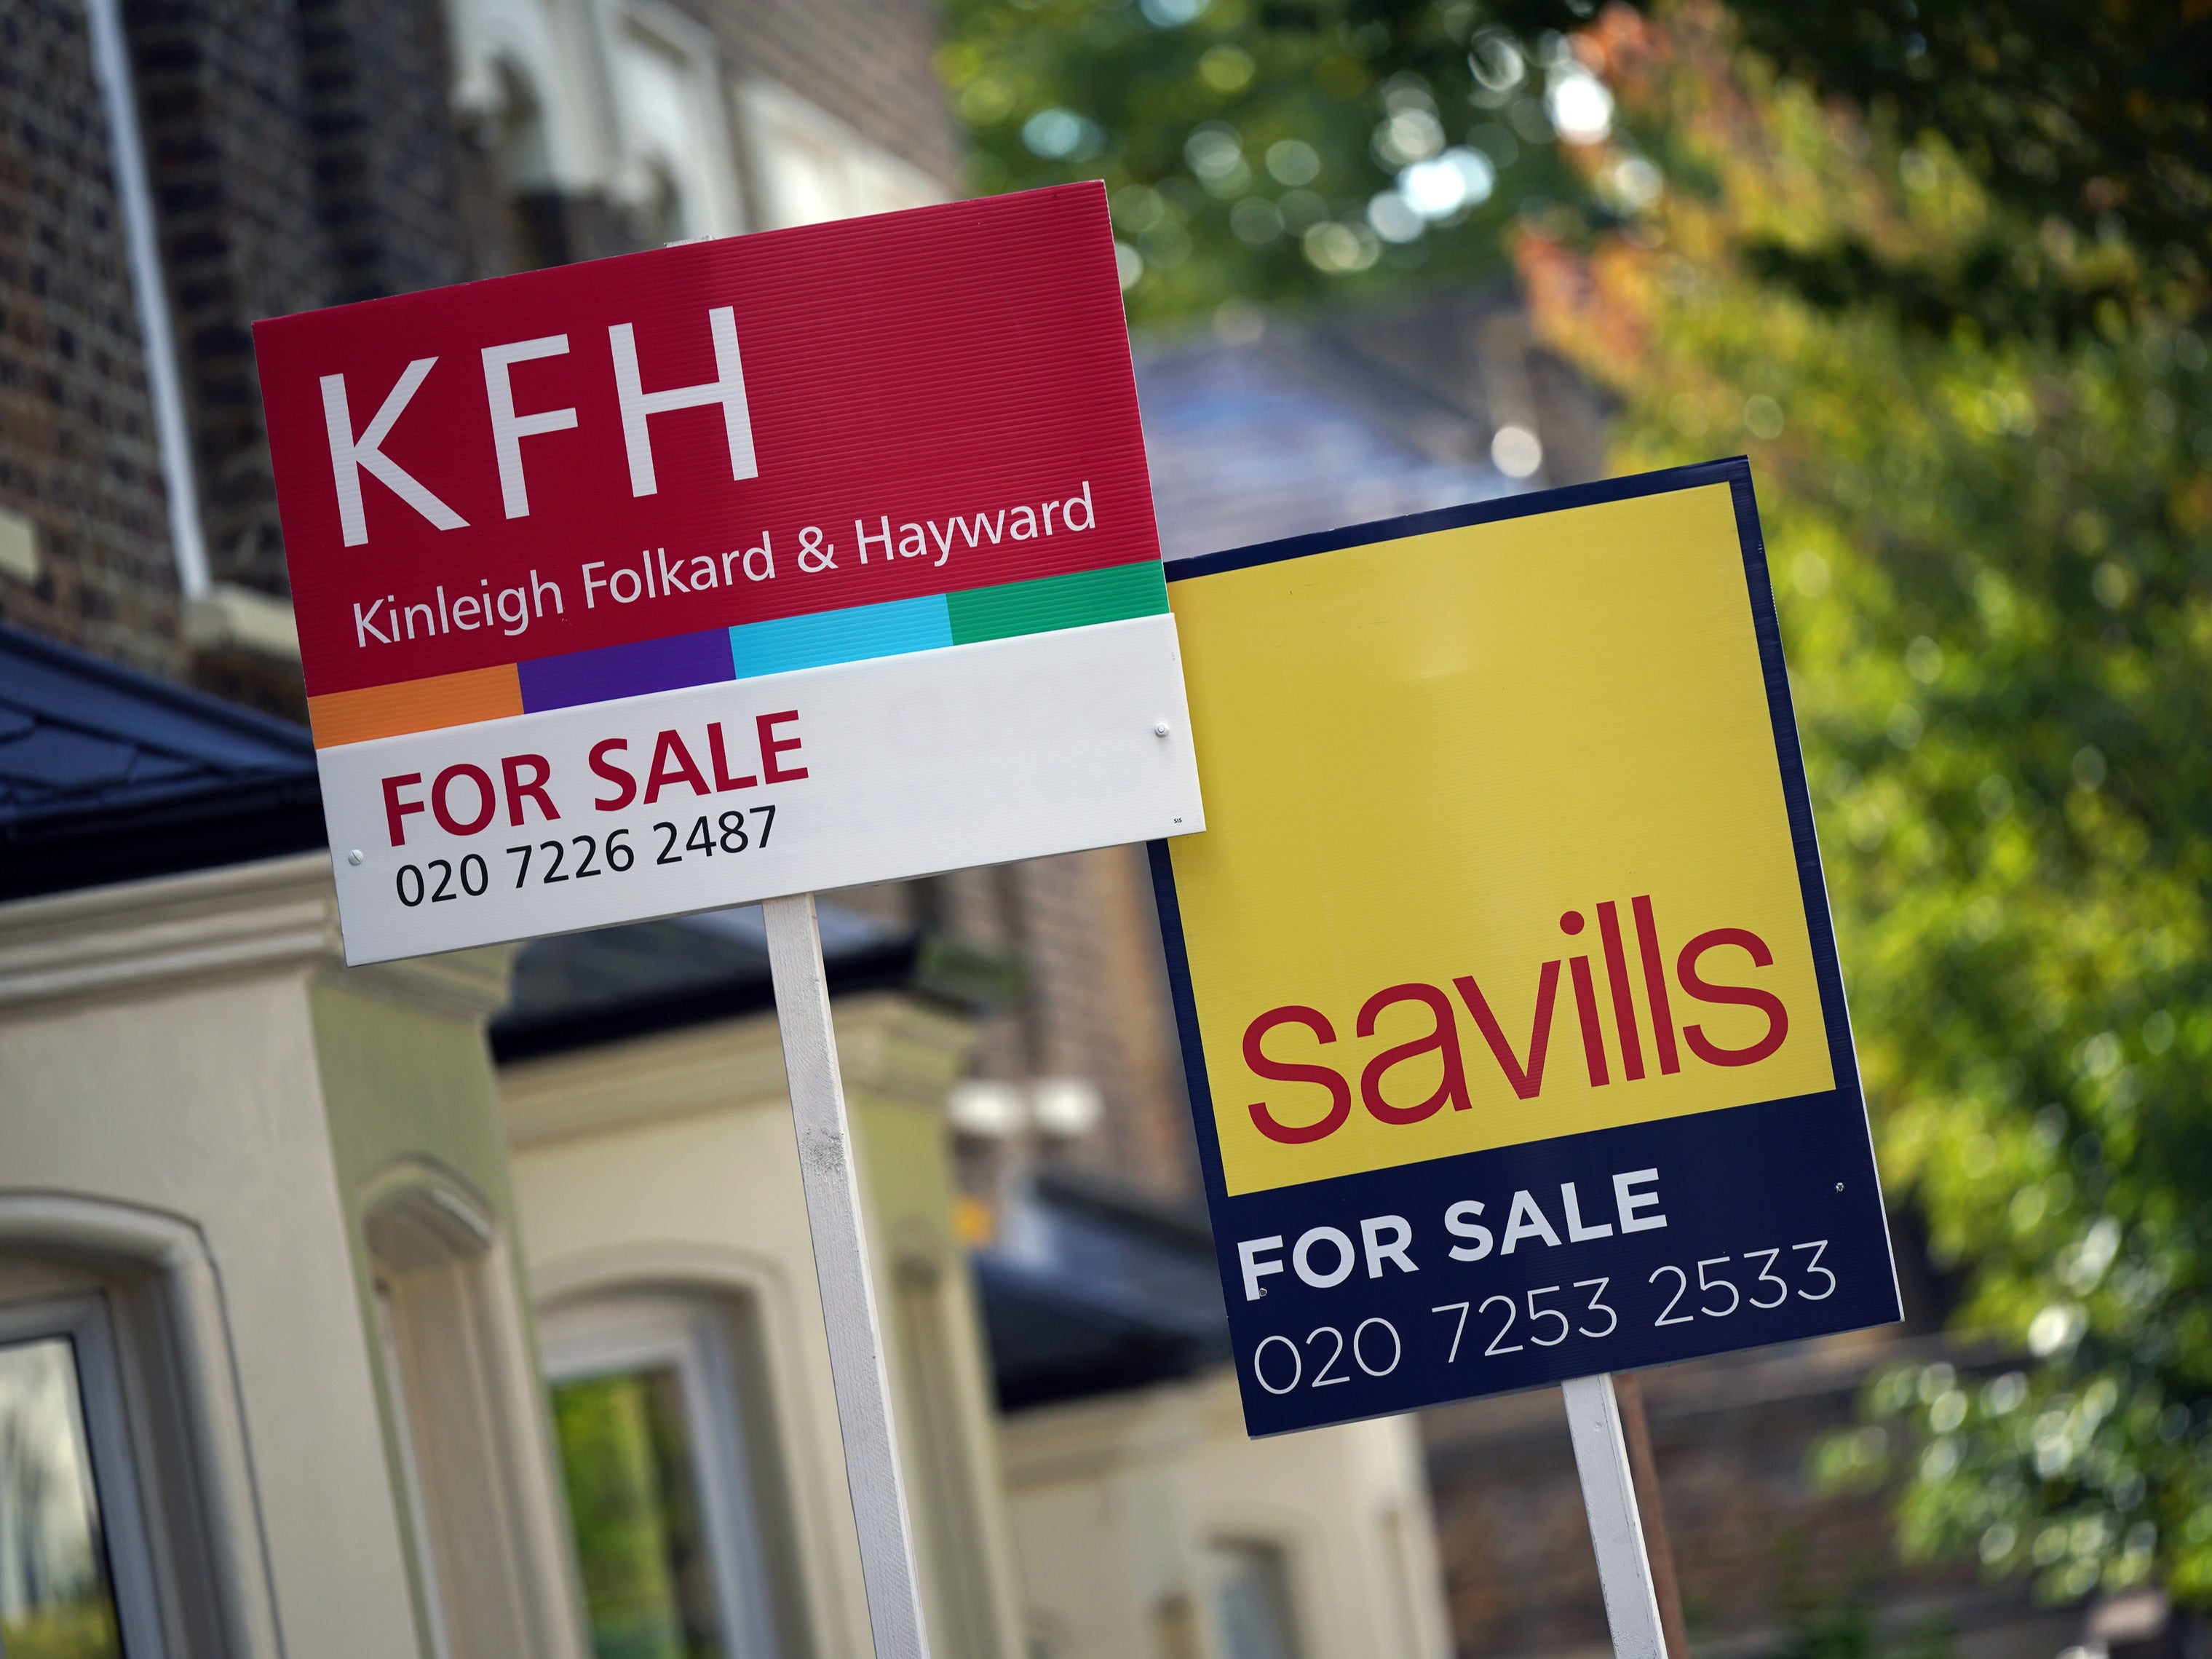 Annual house price growth also slowed sharply to 7.2 per cent in October